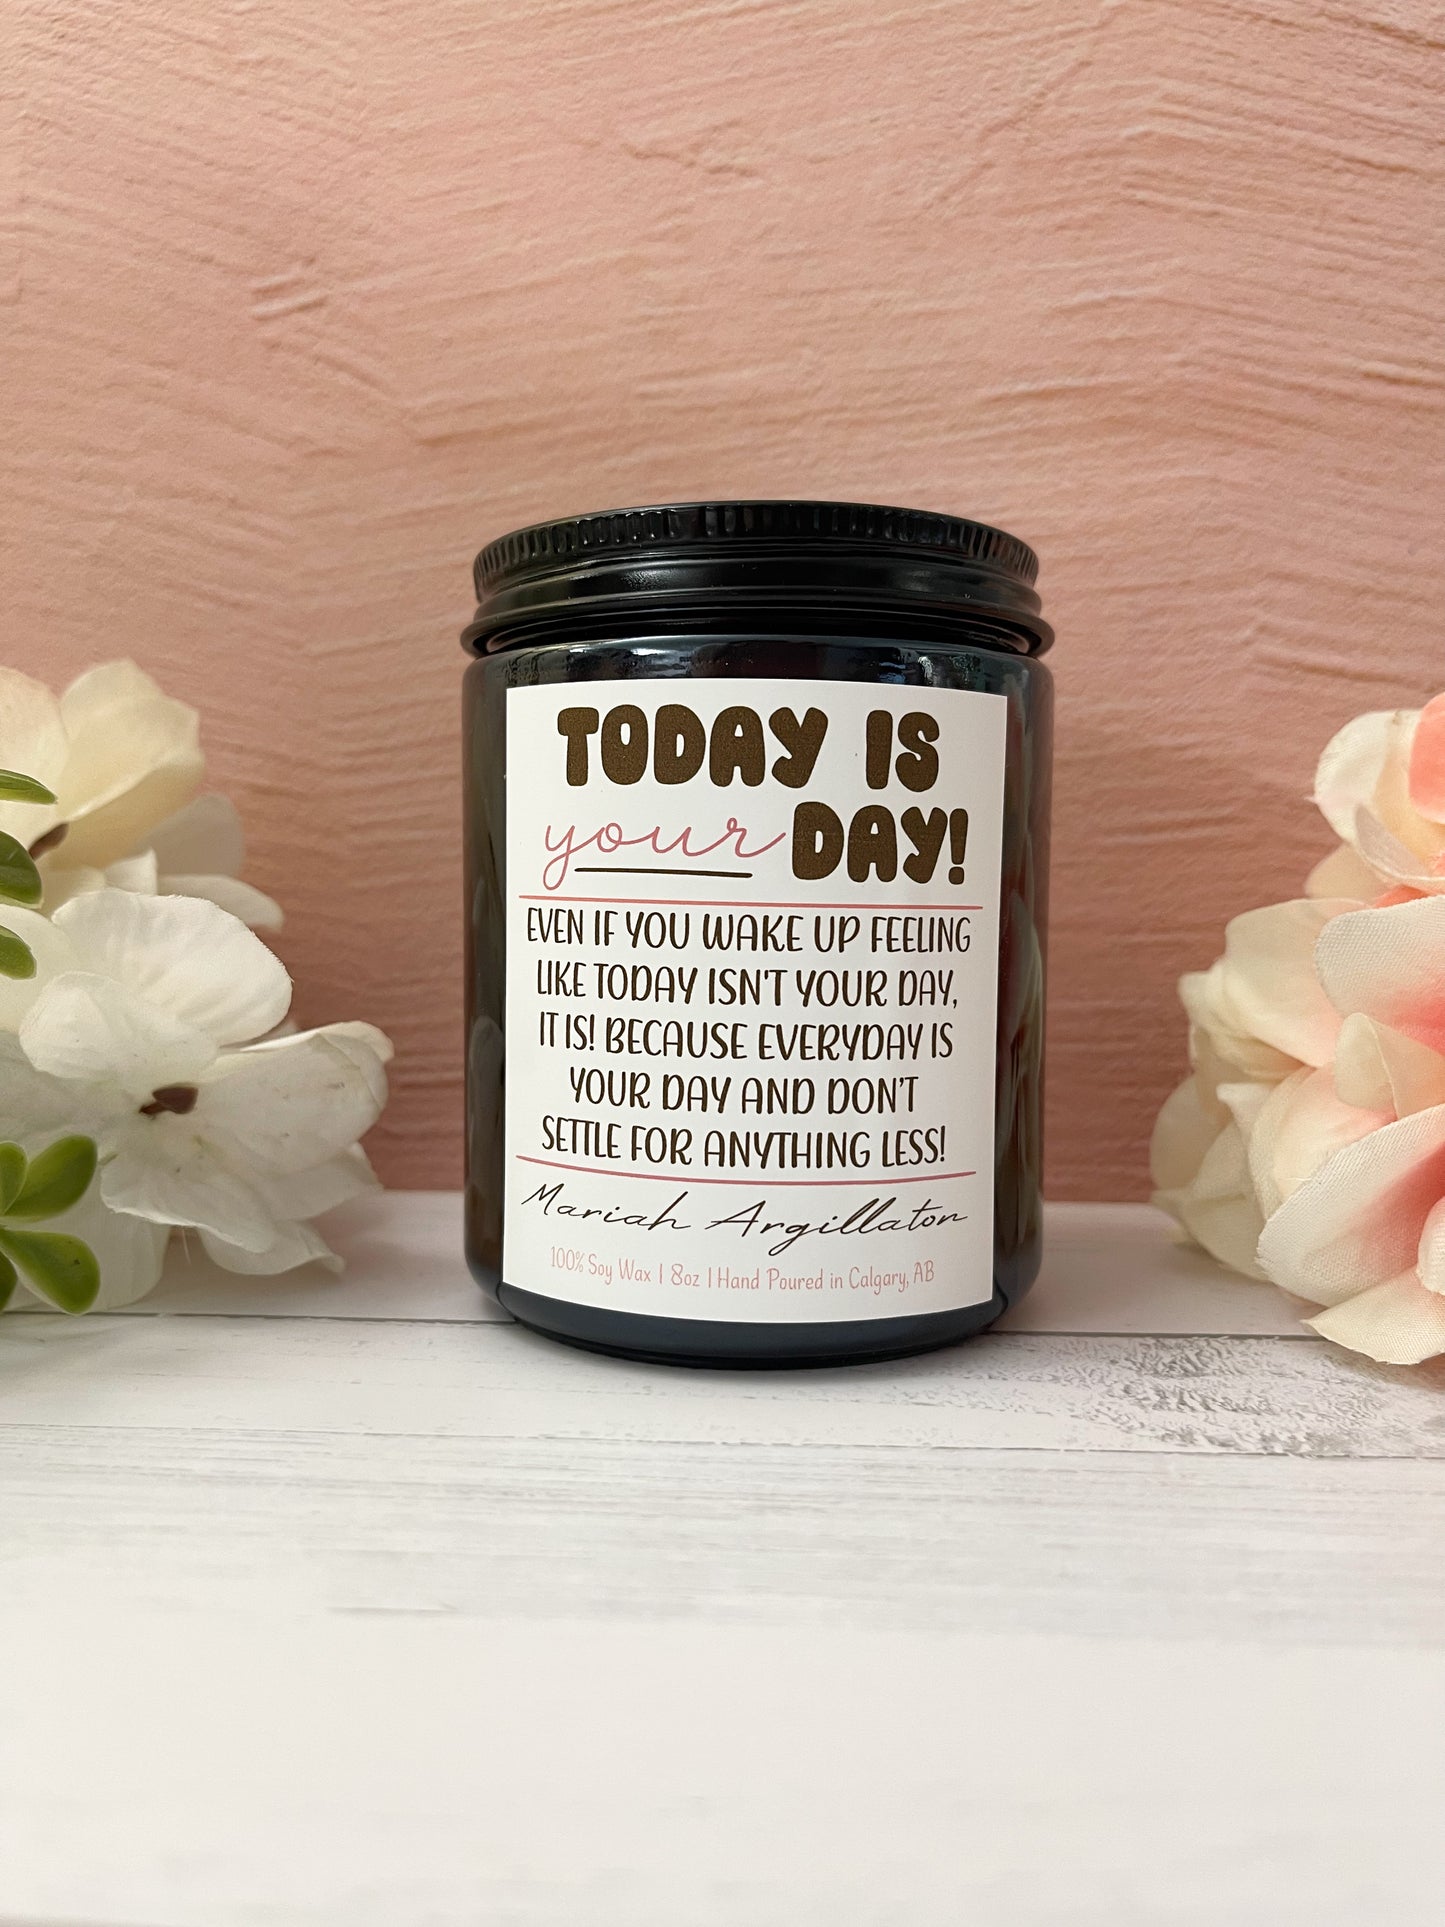 Today Is Your Day, Orange Creamsicle Candle!